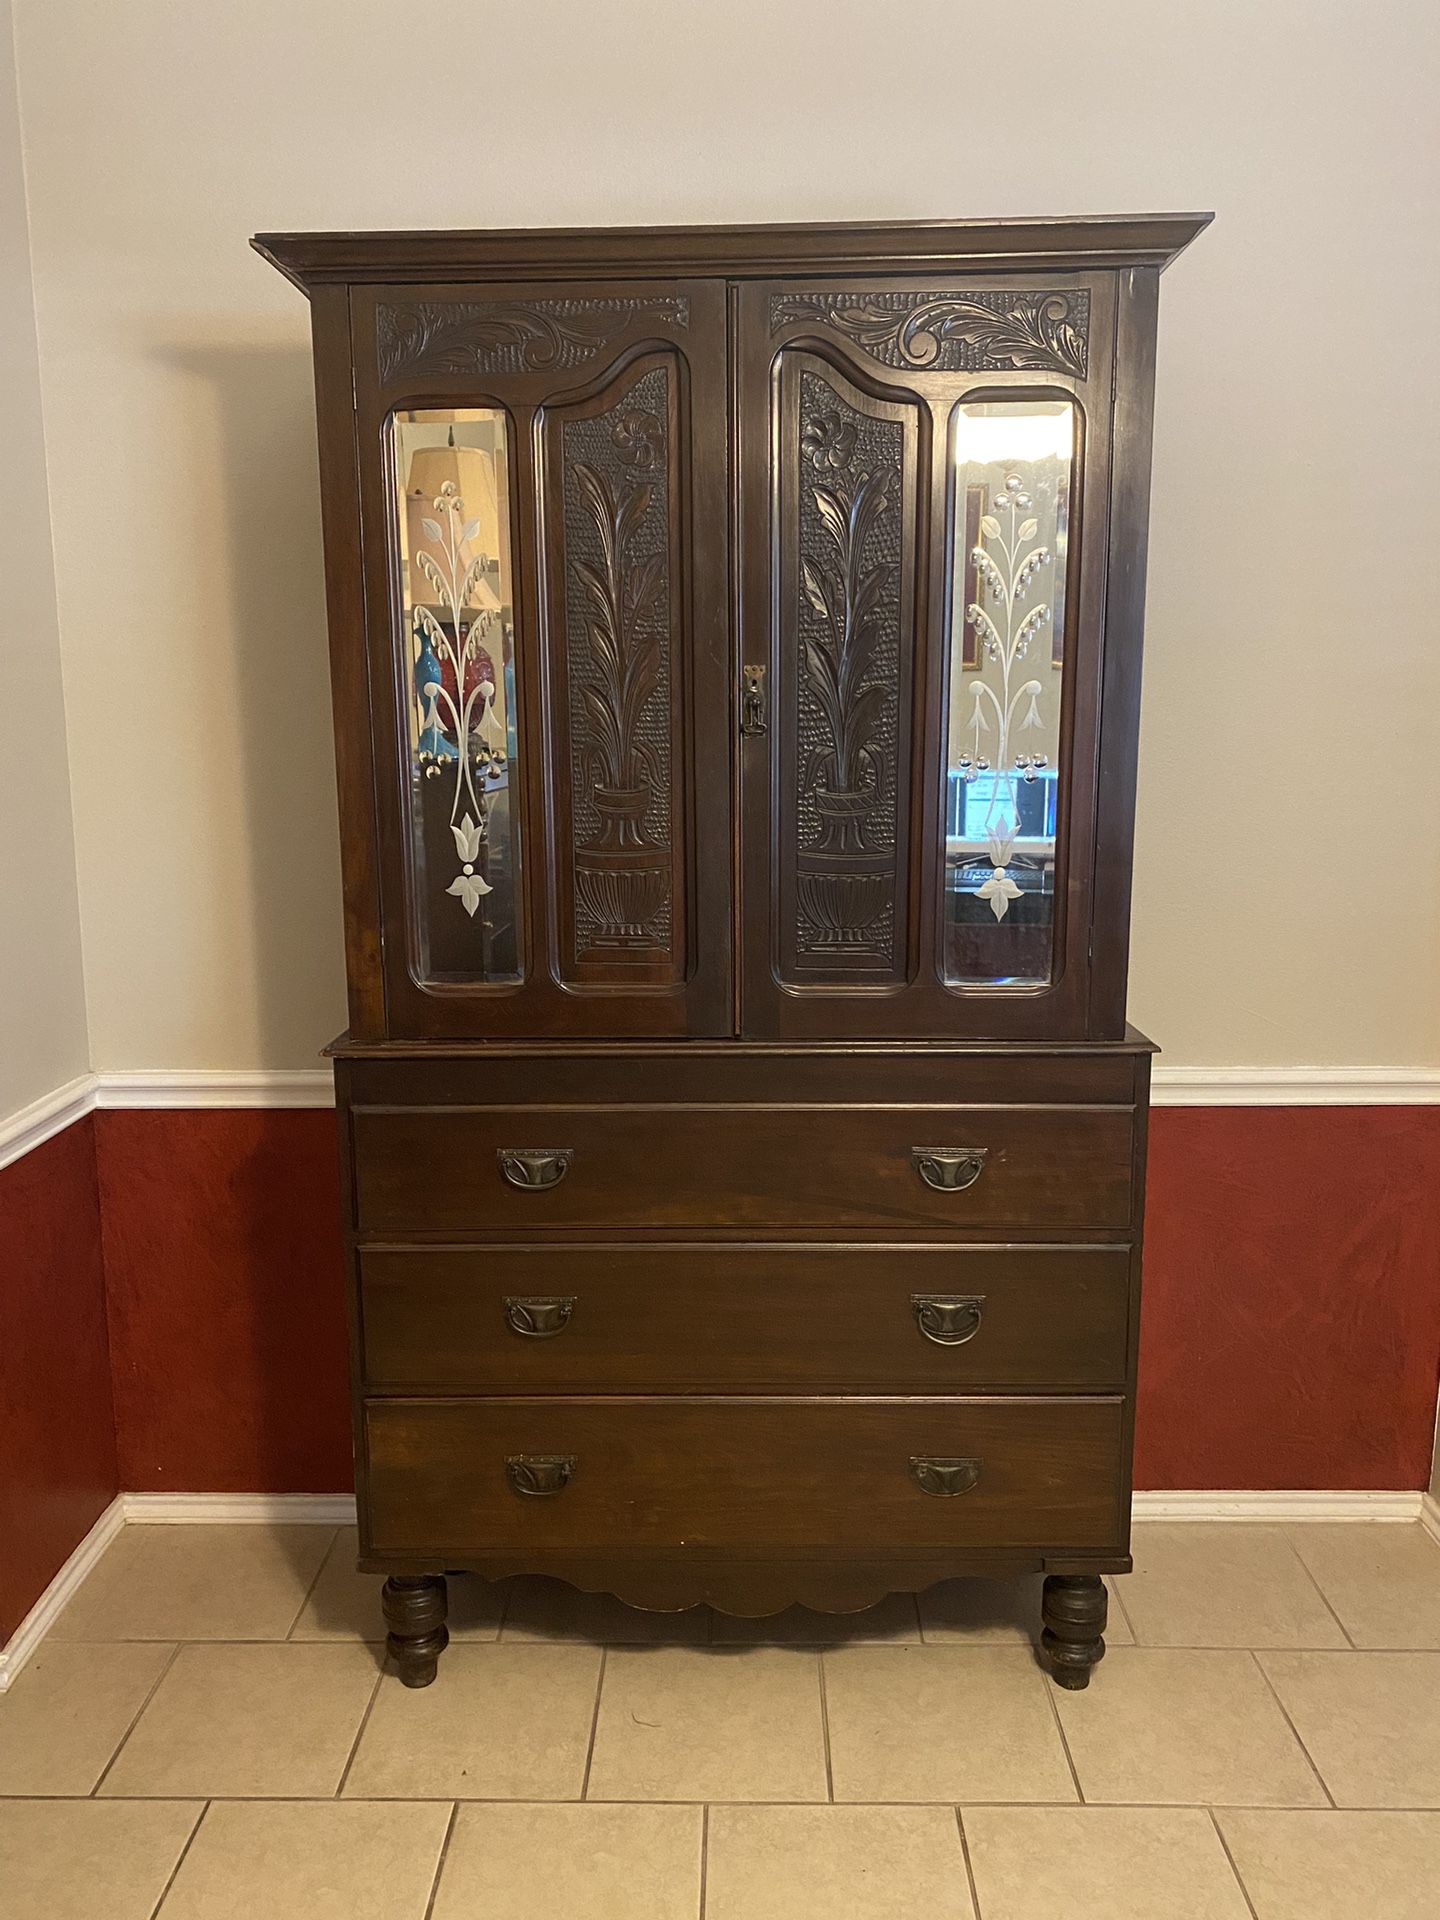 Antique Solid Wood Hutch/ Cabinet 